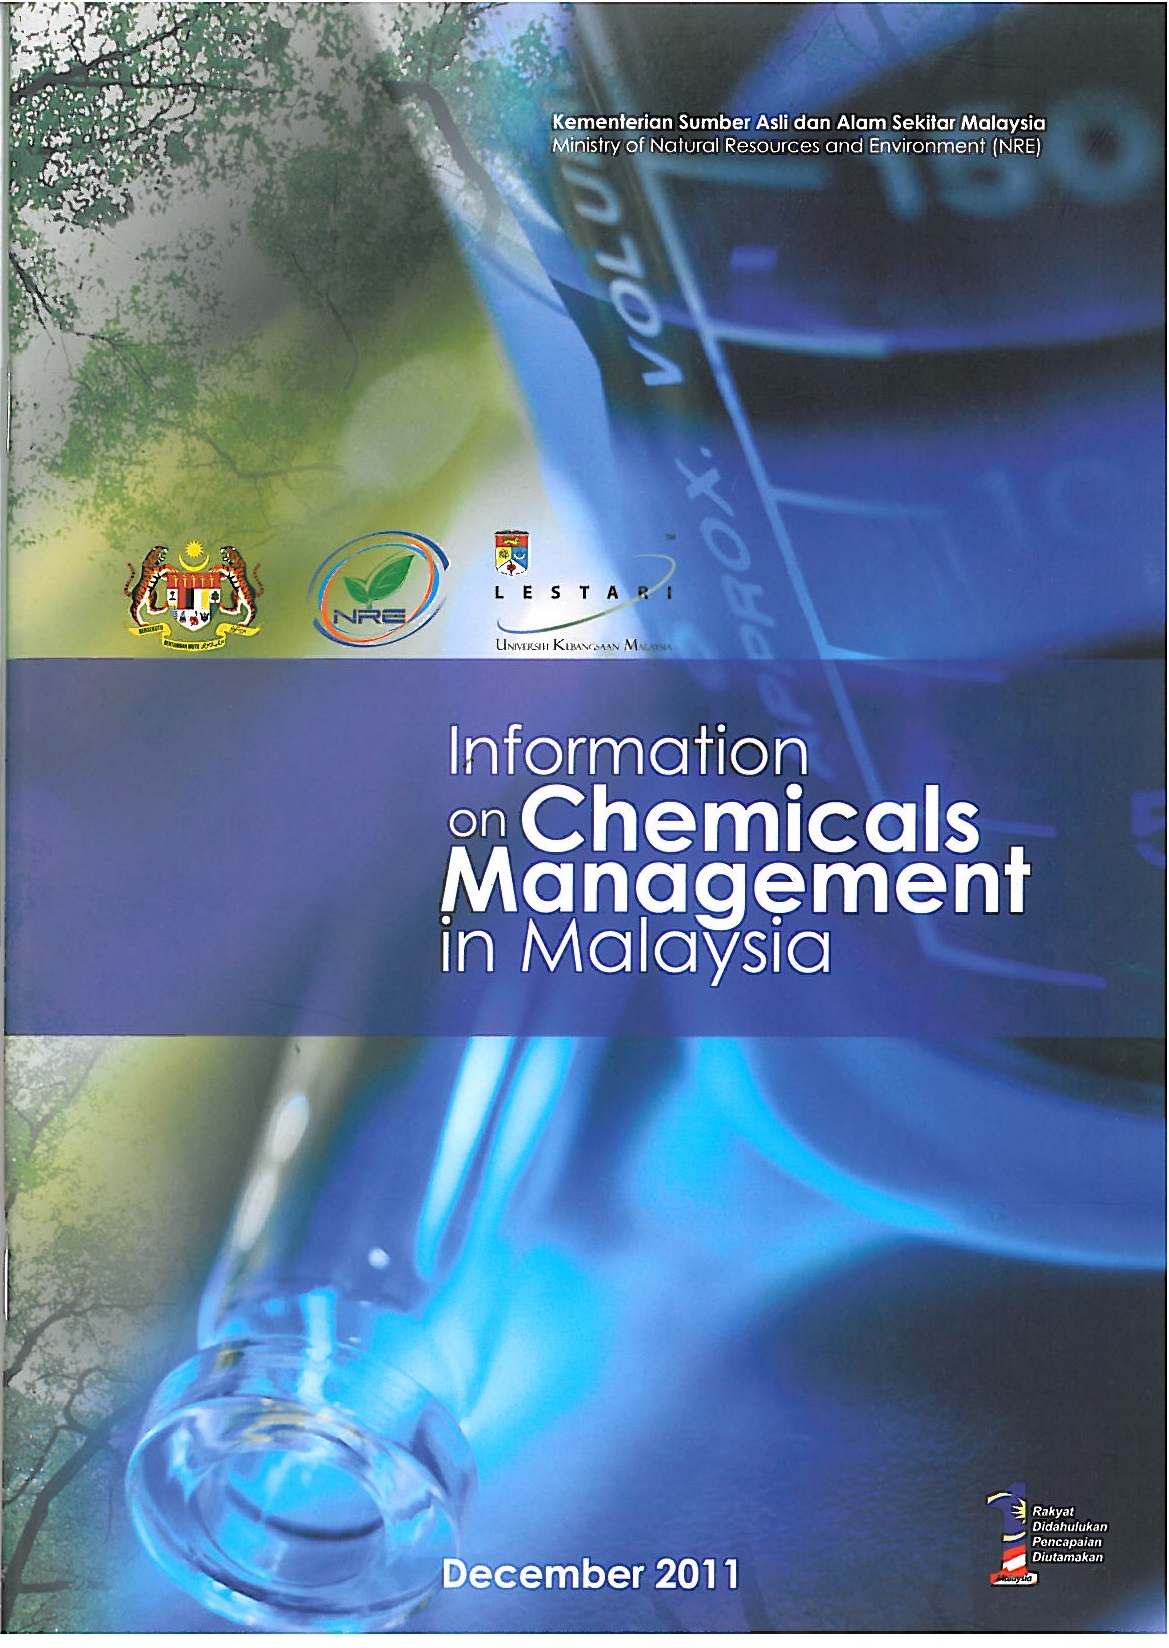 Information on Chemicals Management in Malaysia